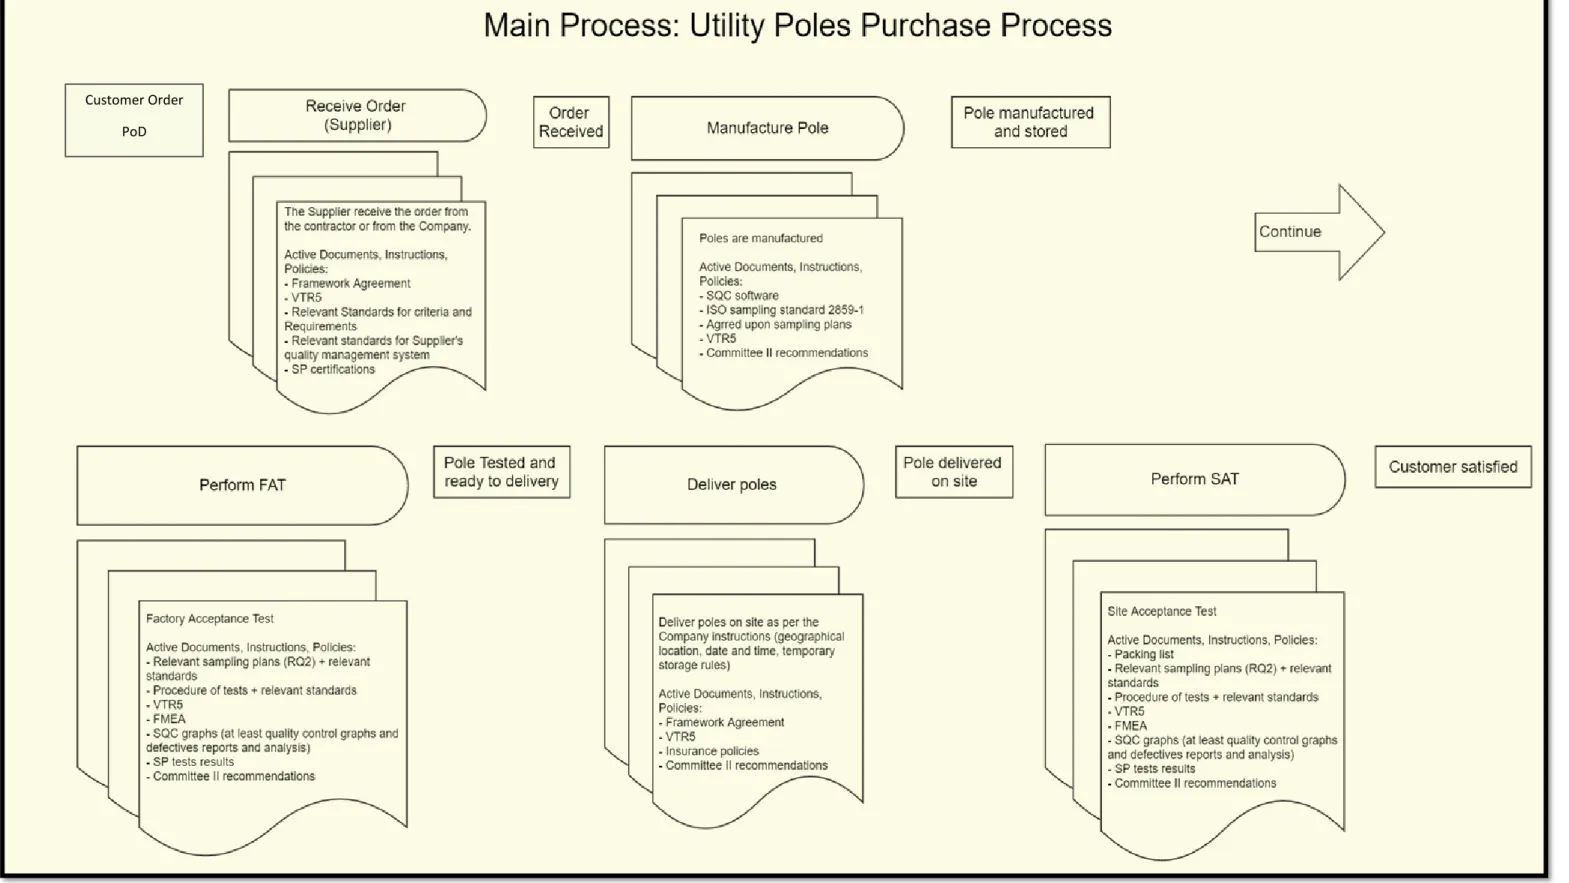 Figure A3-2-1. Proposed Improved Purchase Process - Main Process